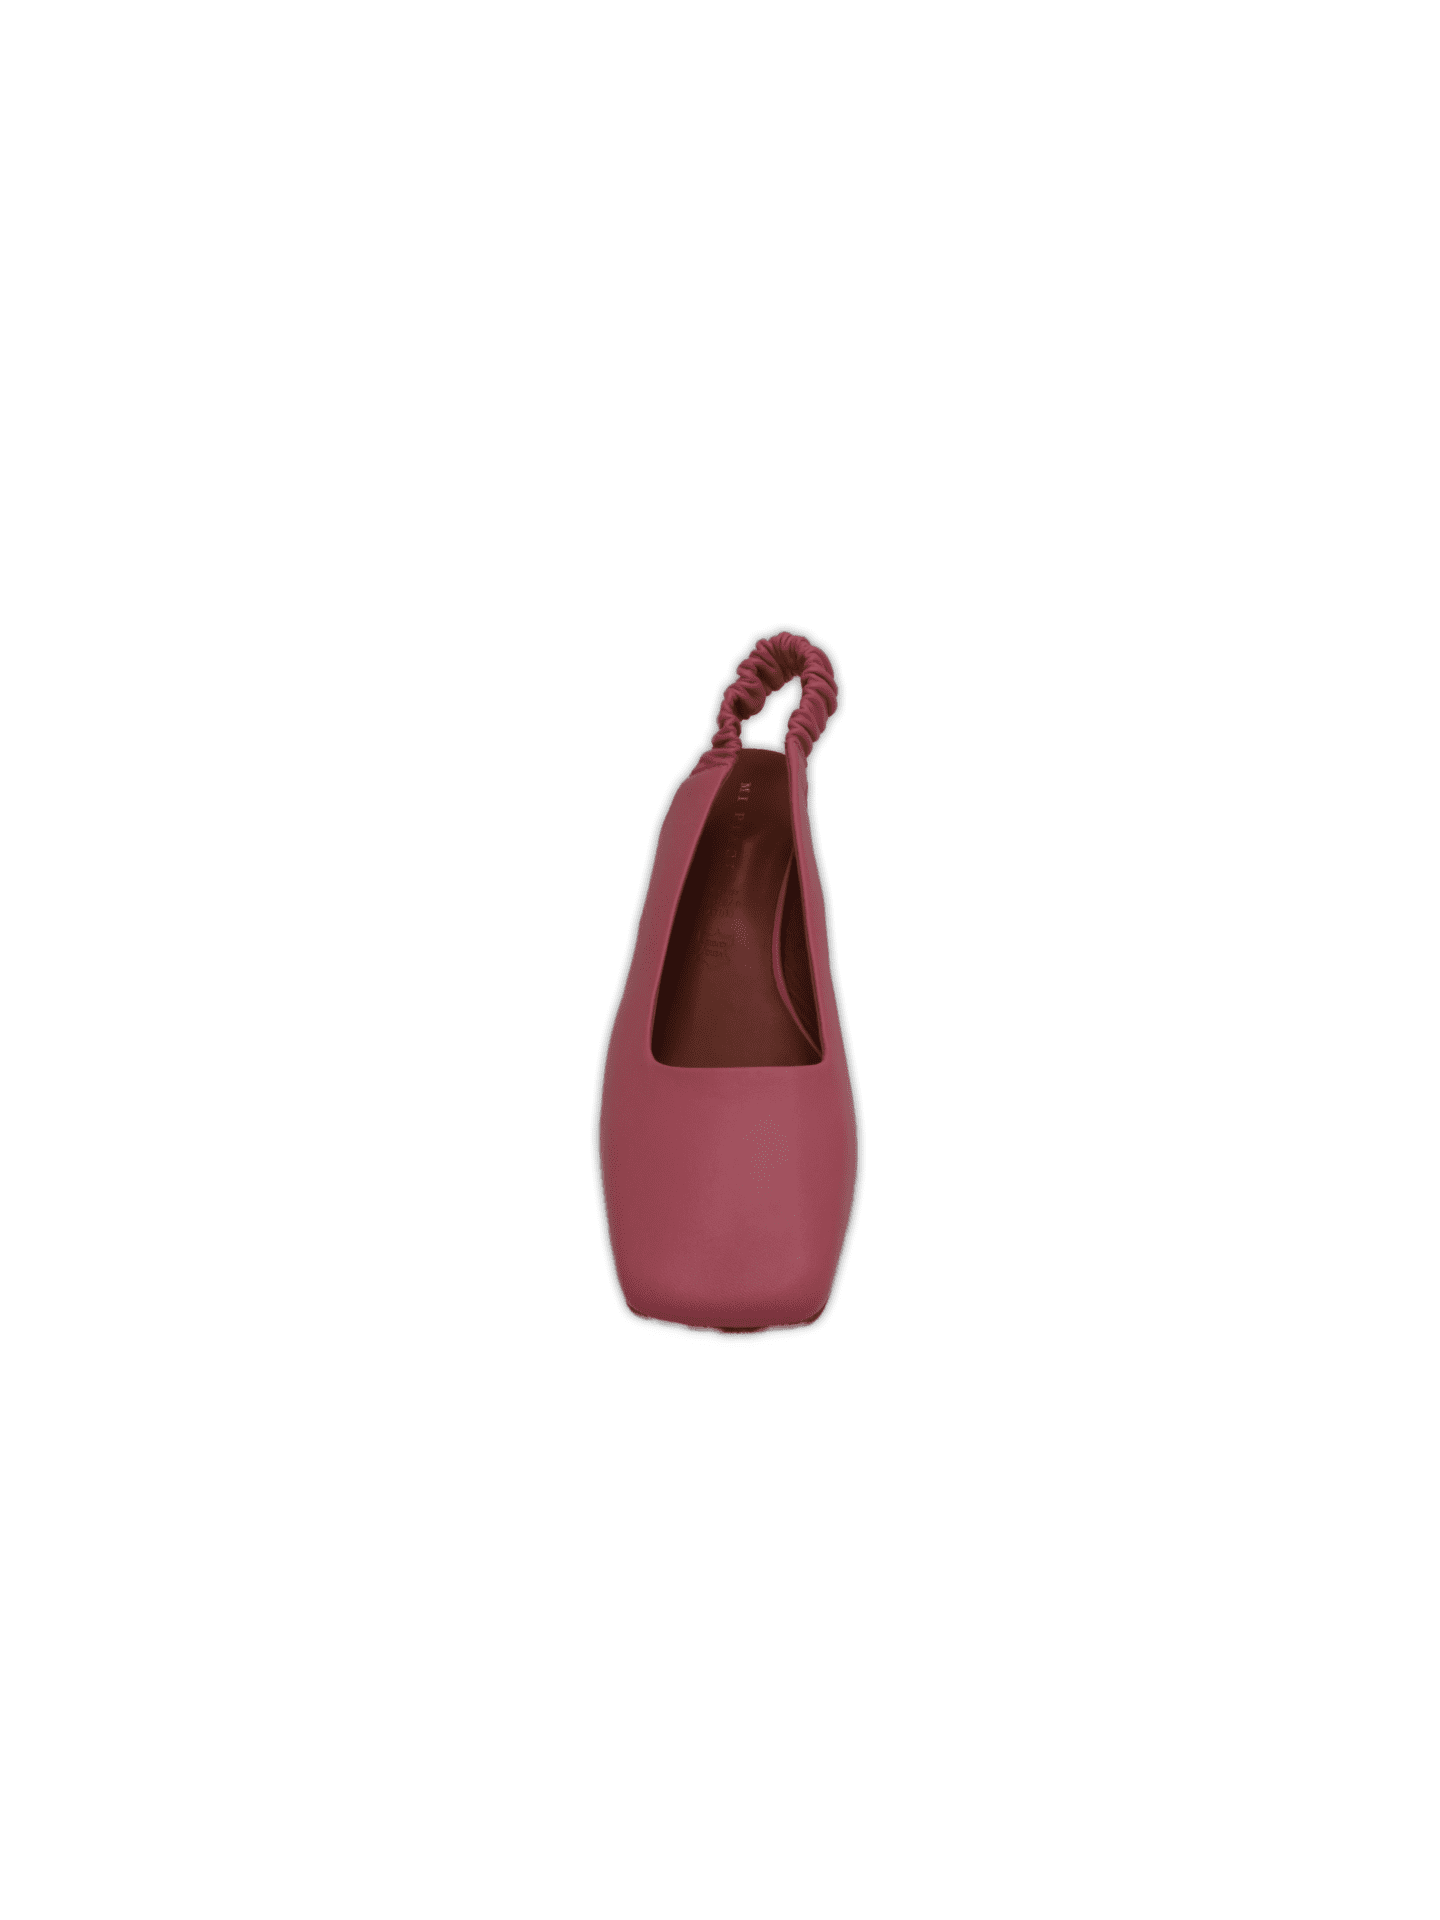 Pink Leather Slingback mules, featuring playful ruched detailing and fully lined leather. Perfectly balancing her block heel and softly squared toe. Heels are made from Genuine Italian leather and are a size EU 40 / NZ 9. Pink in colour with brown insoles.